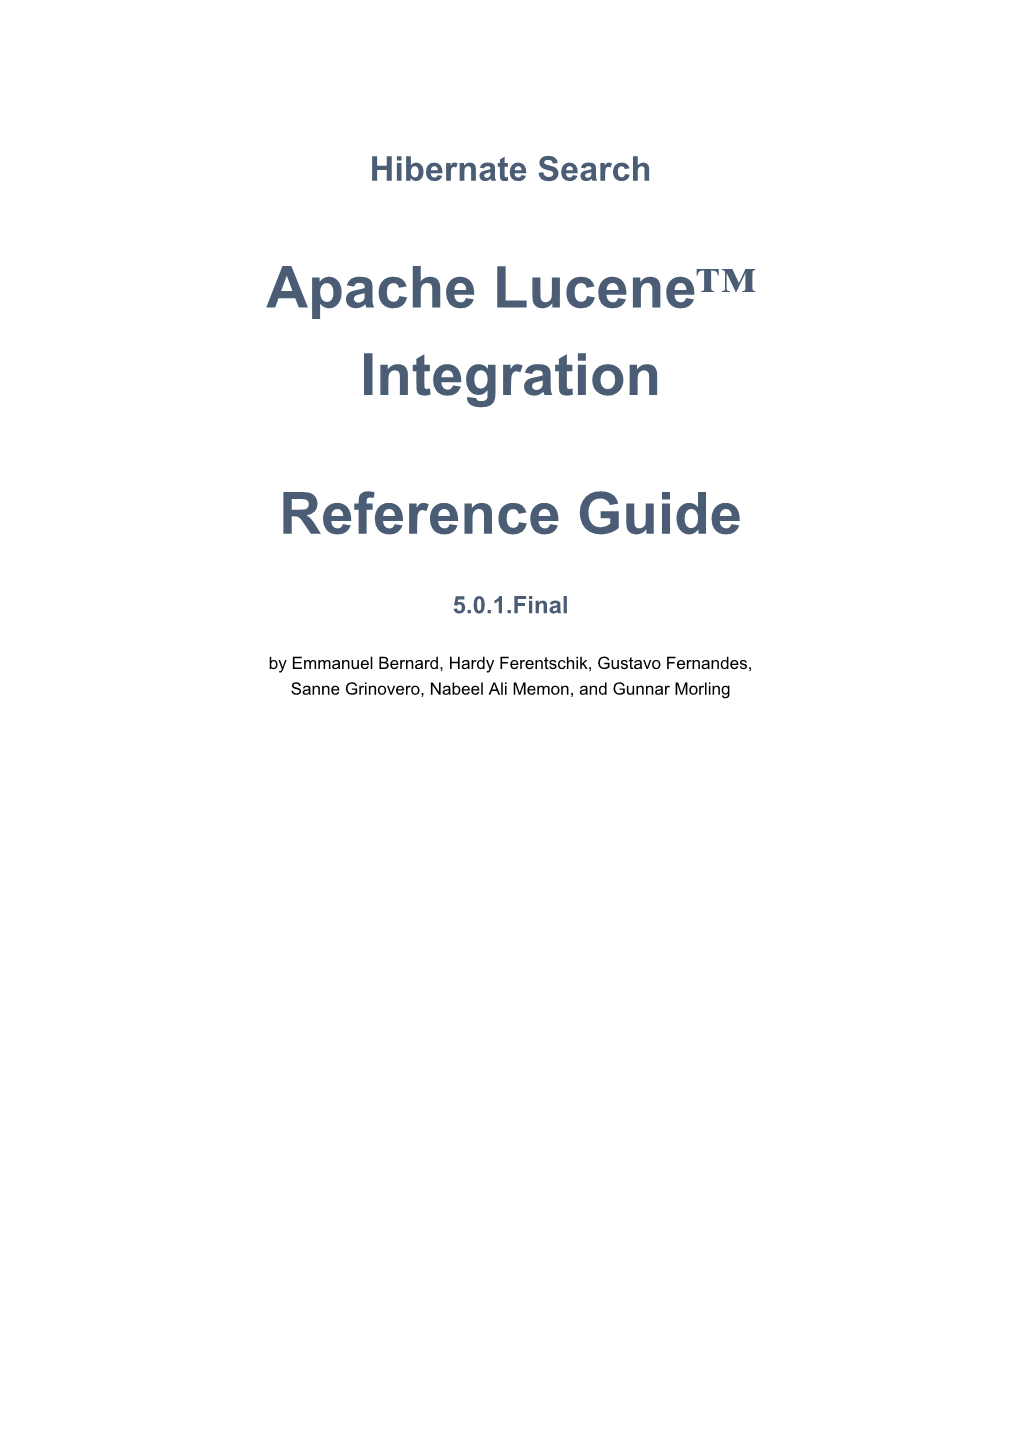 Apache Lucene™ Integration Reference Guide